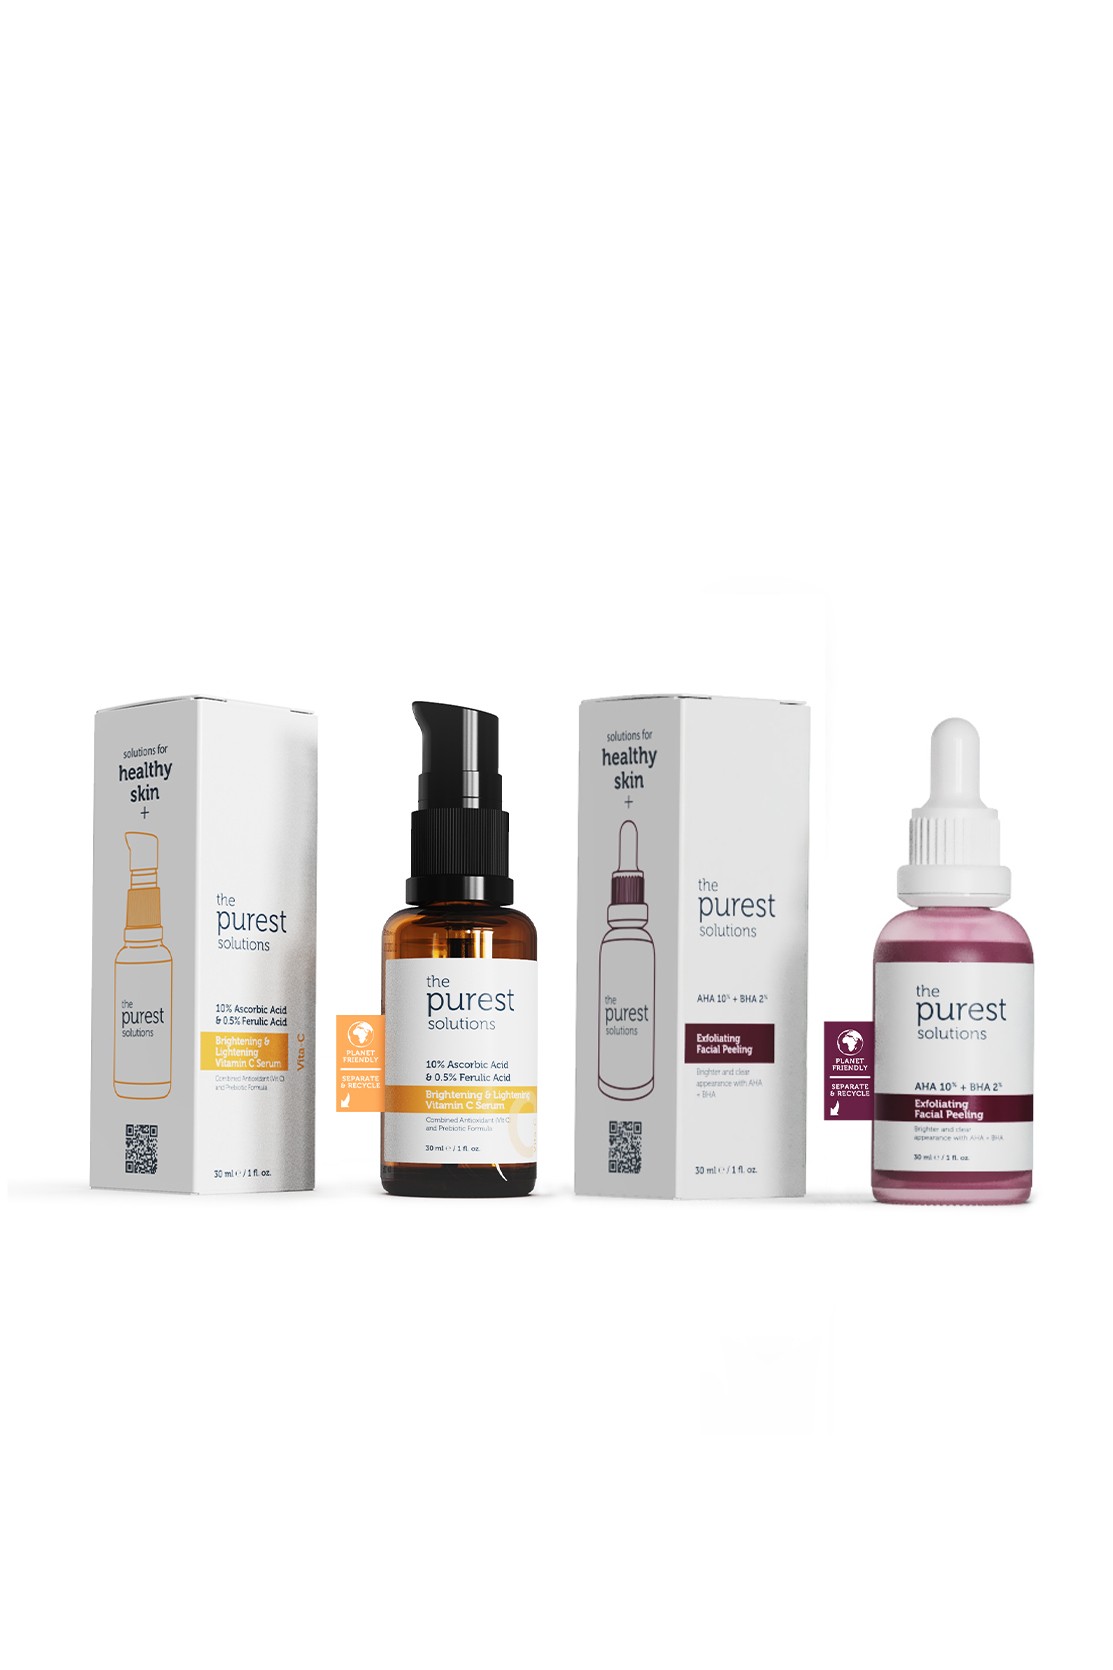 Revitalizing Care Set That Helps to Eliminate Skin Tone Unevenness